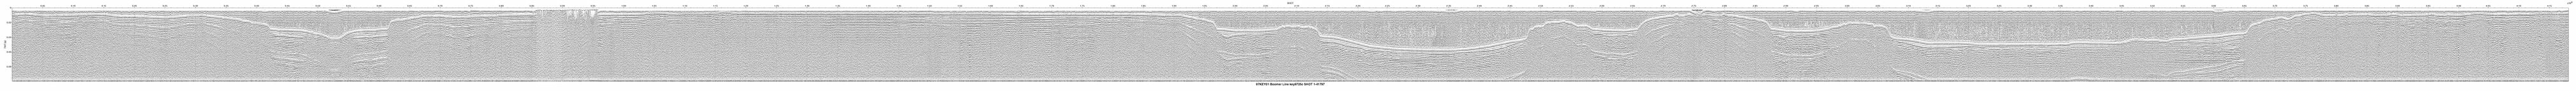 Thumbnail GIF image of the seismic trackline key9725c, with a hotlink to the more detailed, larger JPG image.